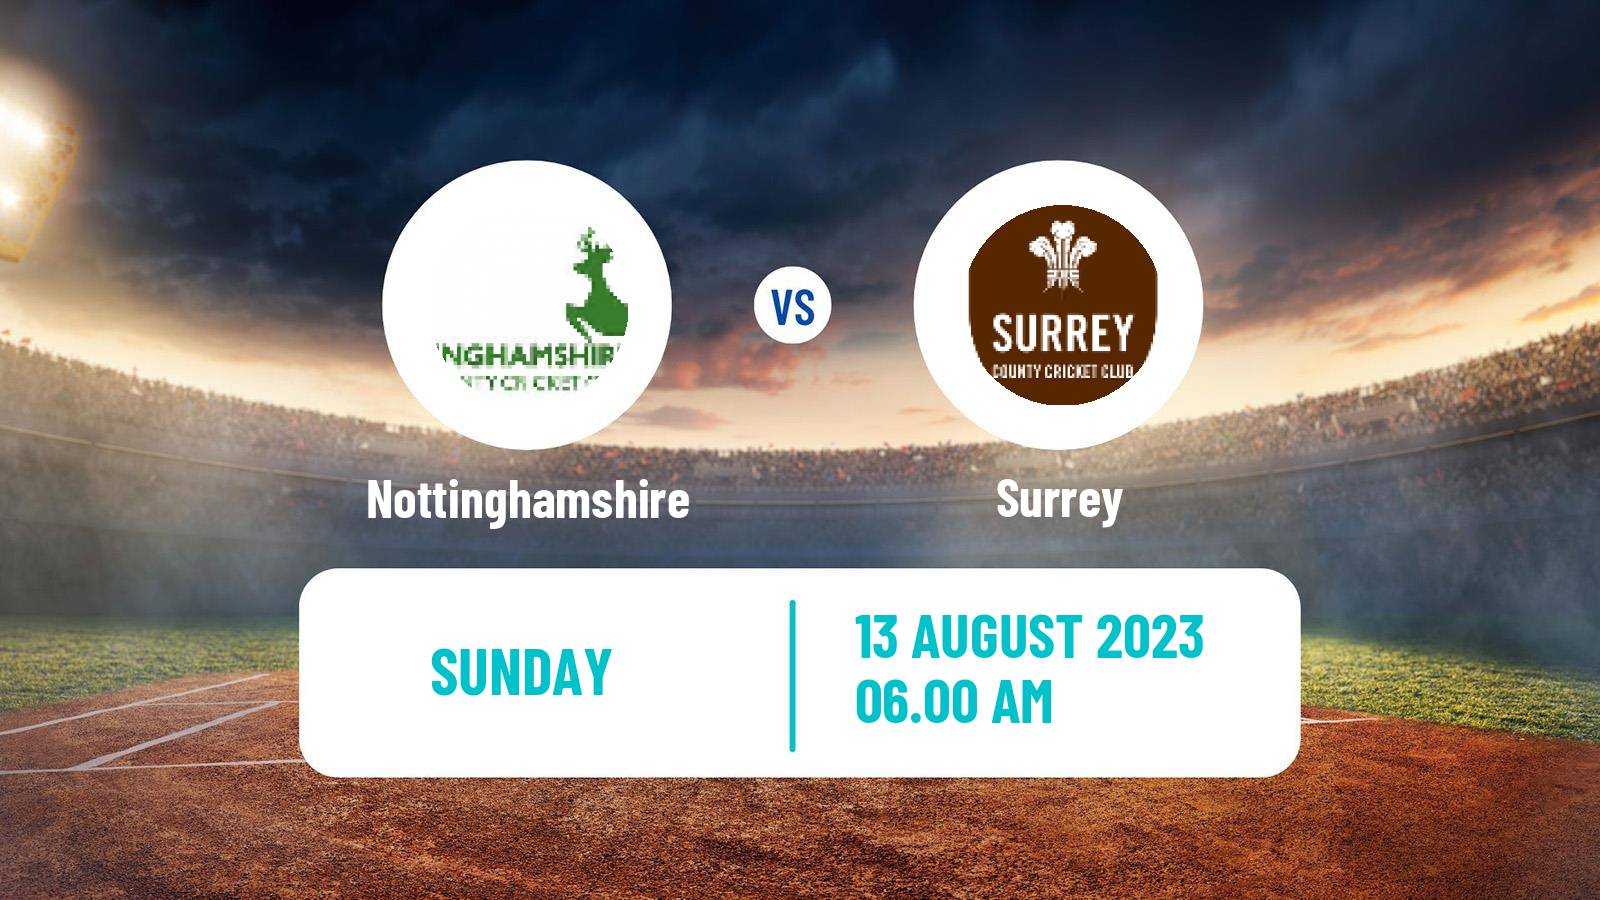 Cricket Royal London One-Day Cup Nottinghamshire - Surrey